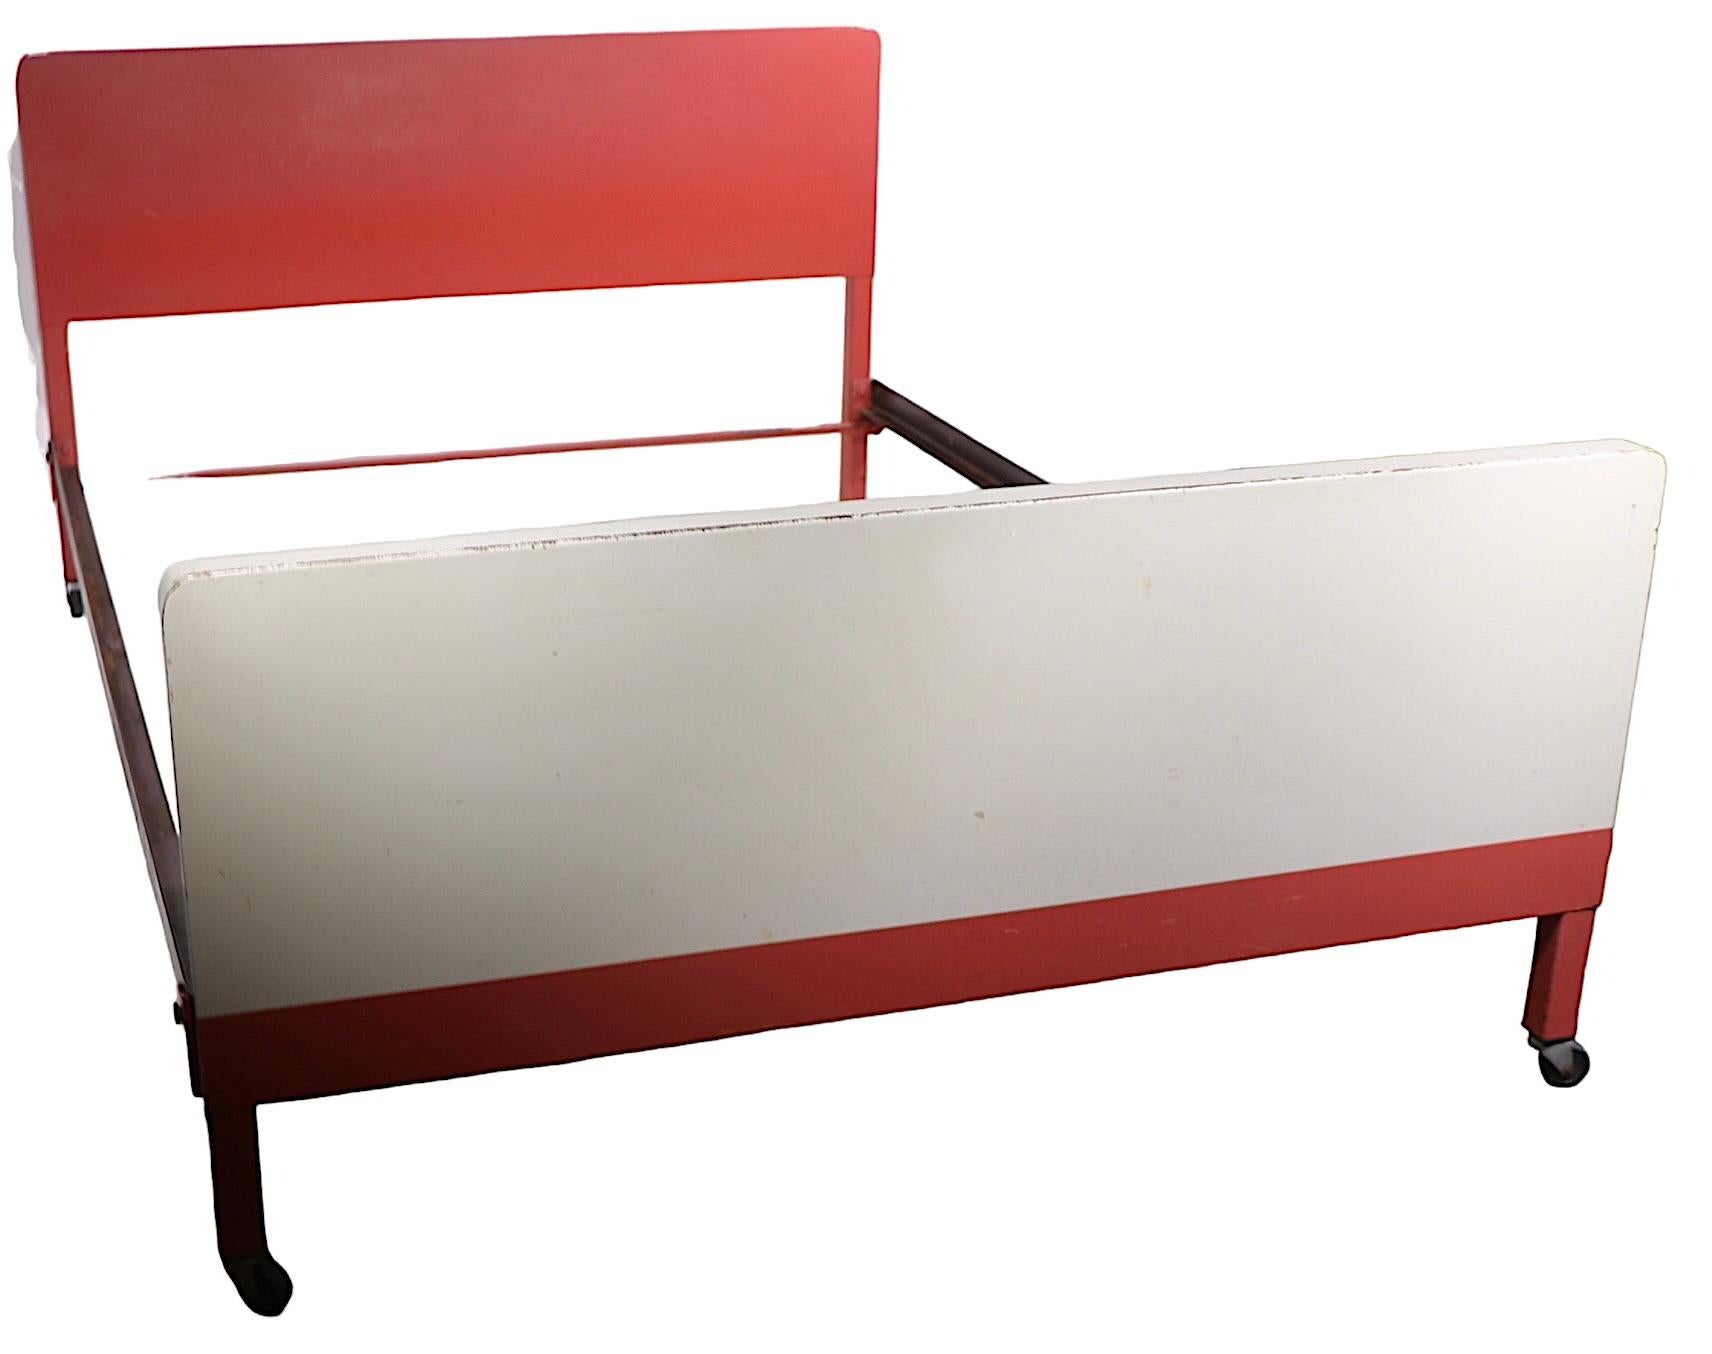 Painted Art Deco Machine Age Industrial  Full Size Metal Bed by Bel Geddes for Simmons  For Sale